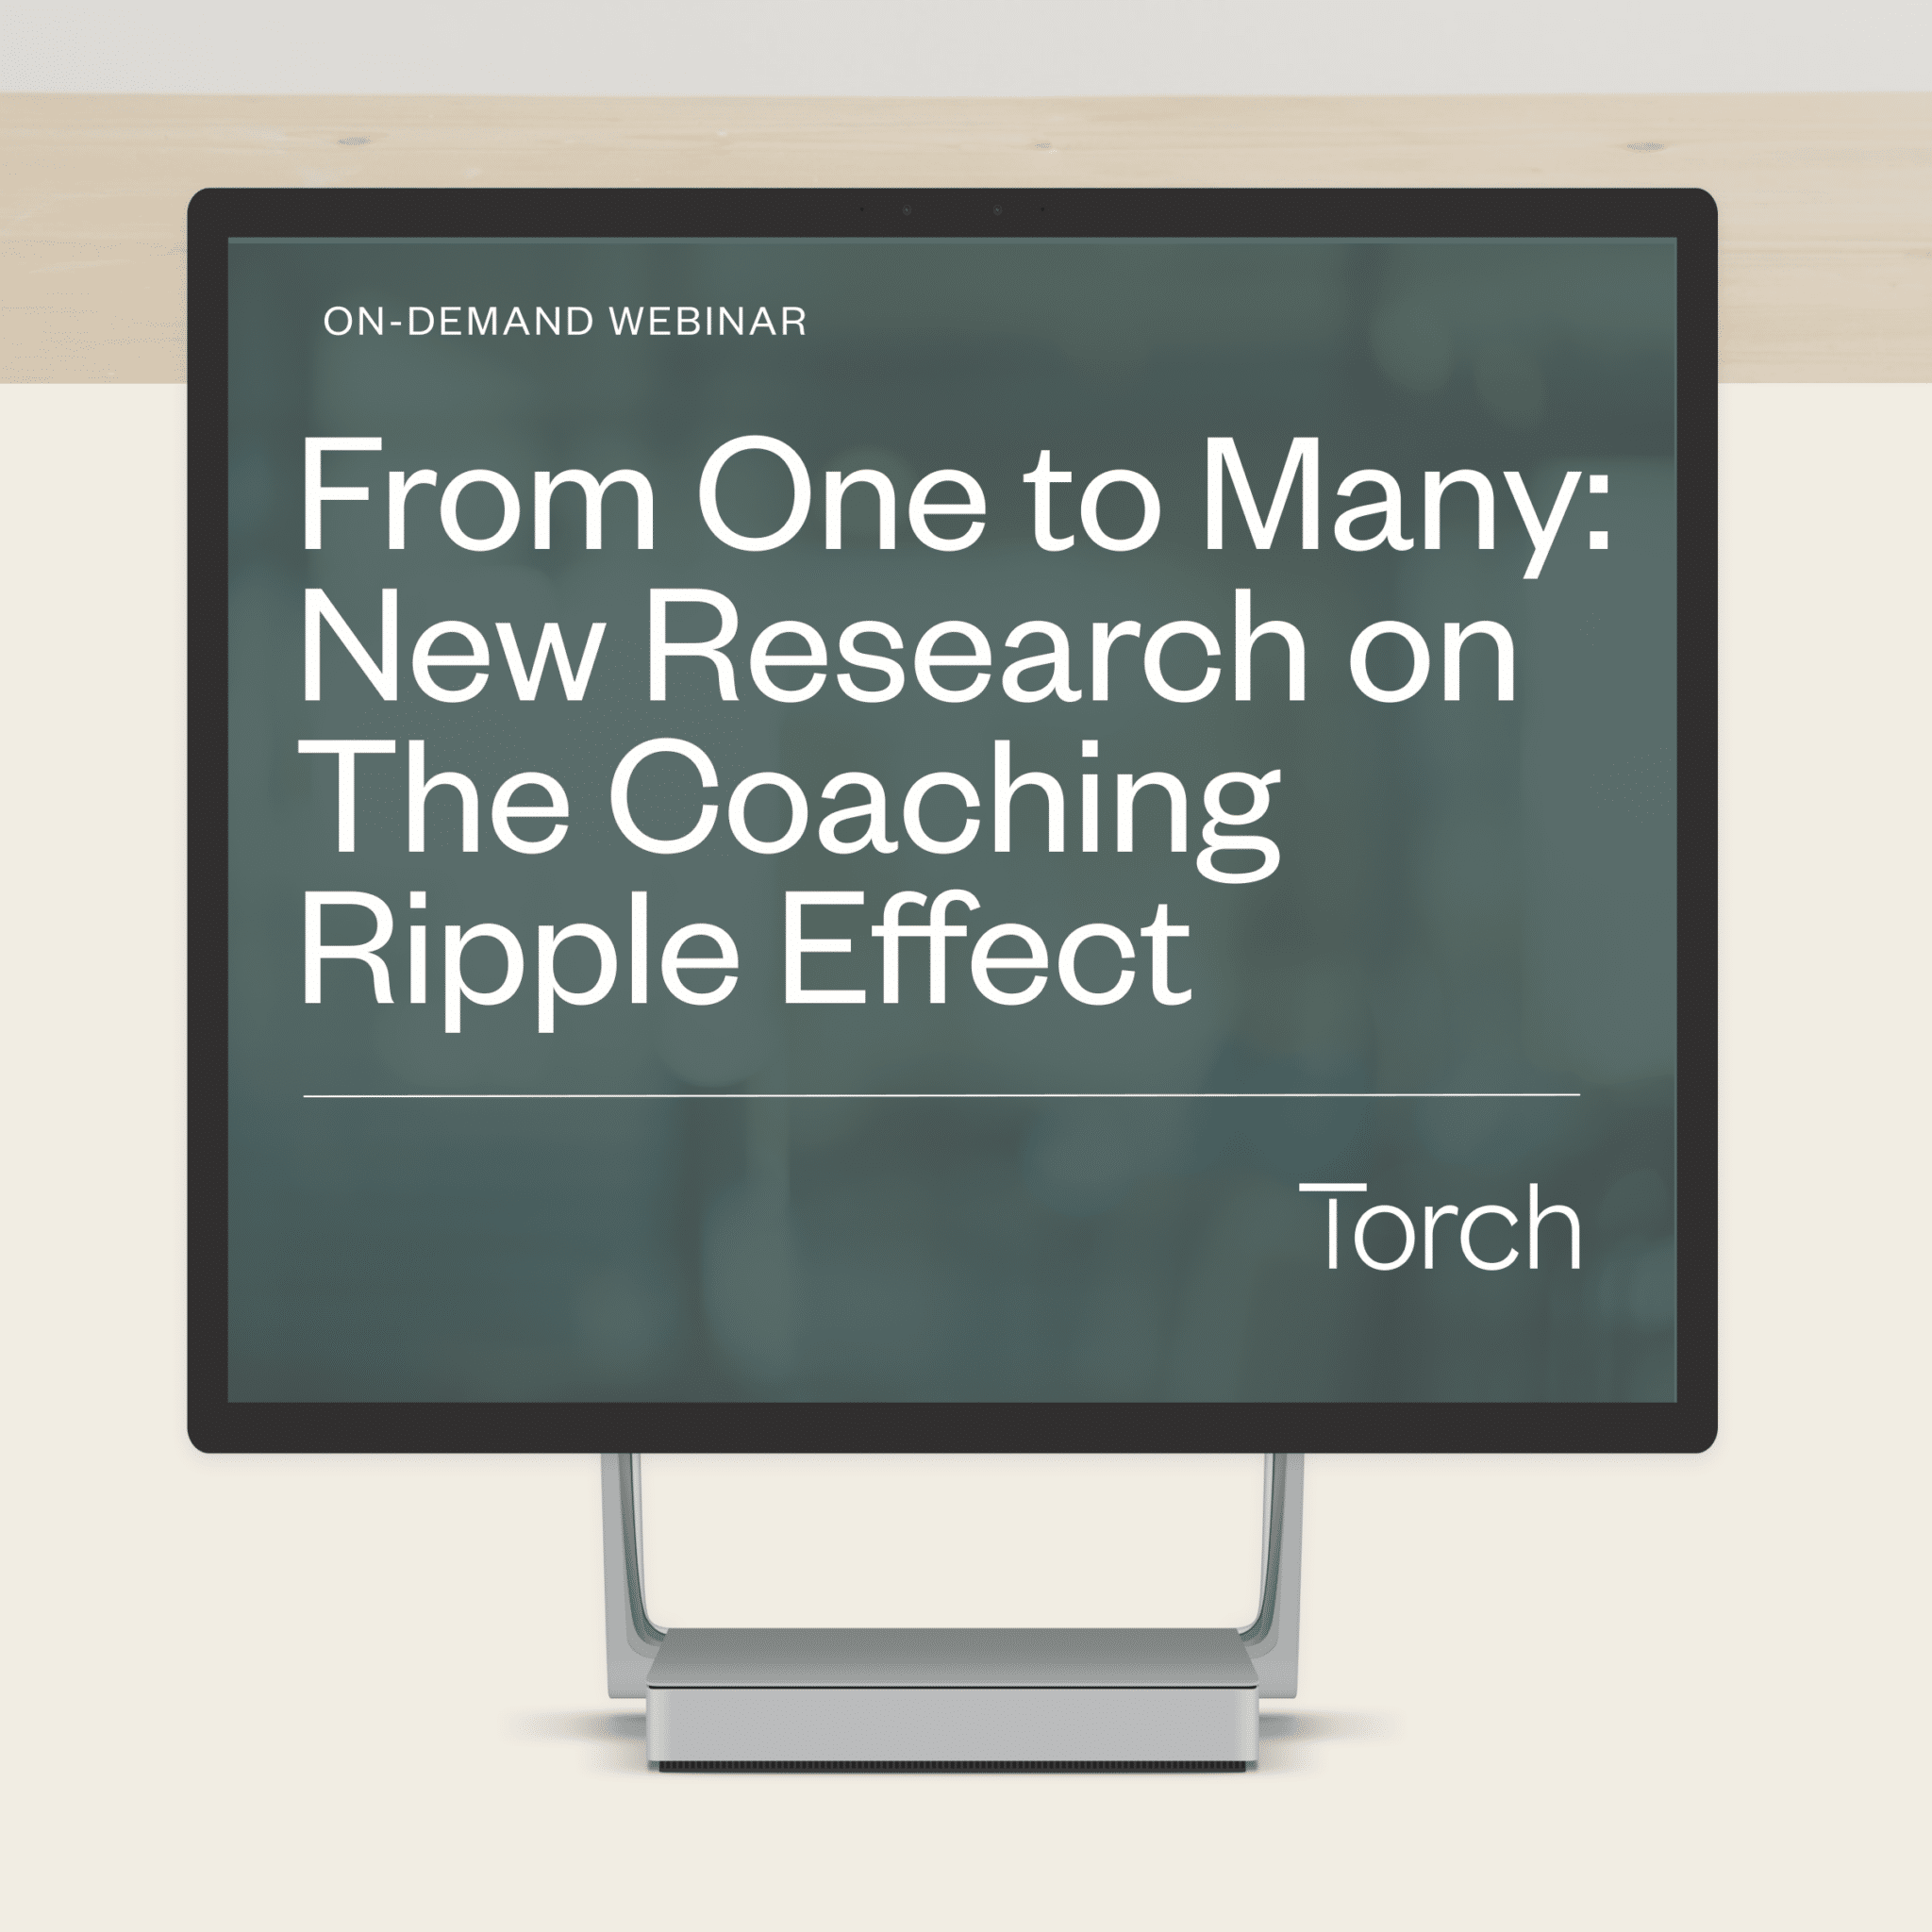 From One to Many: New Research on The Coaching Ripple Effect